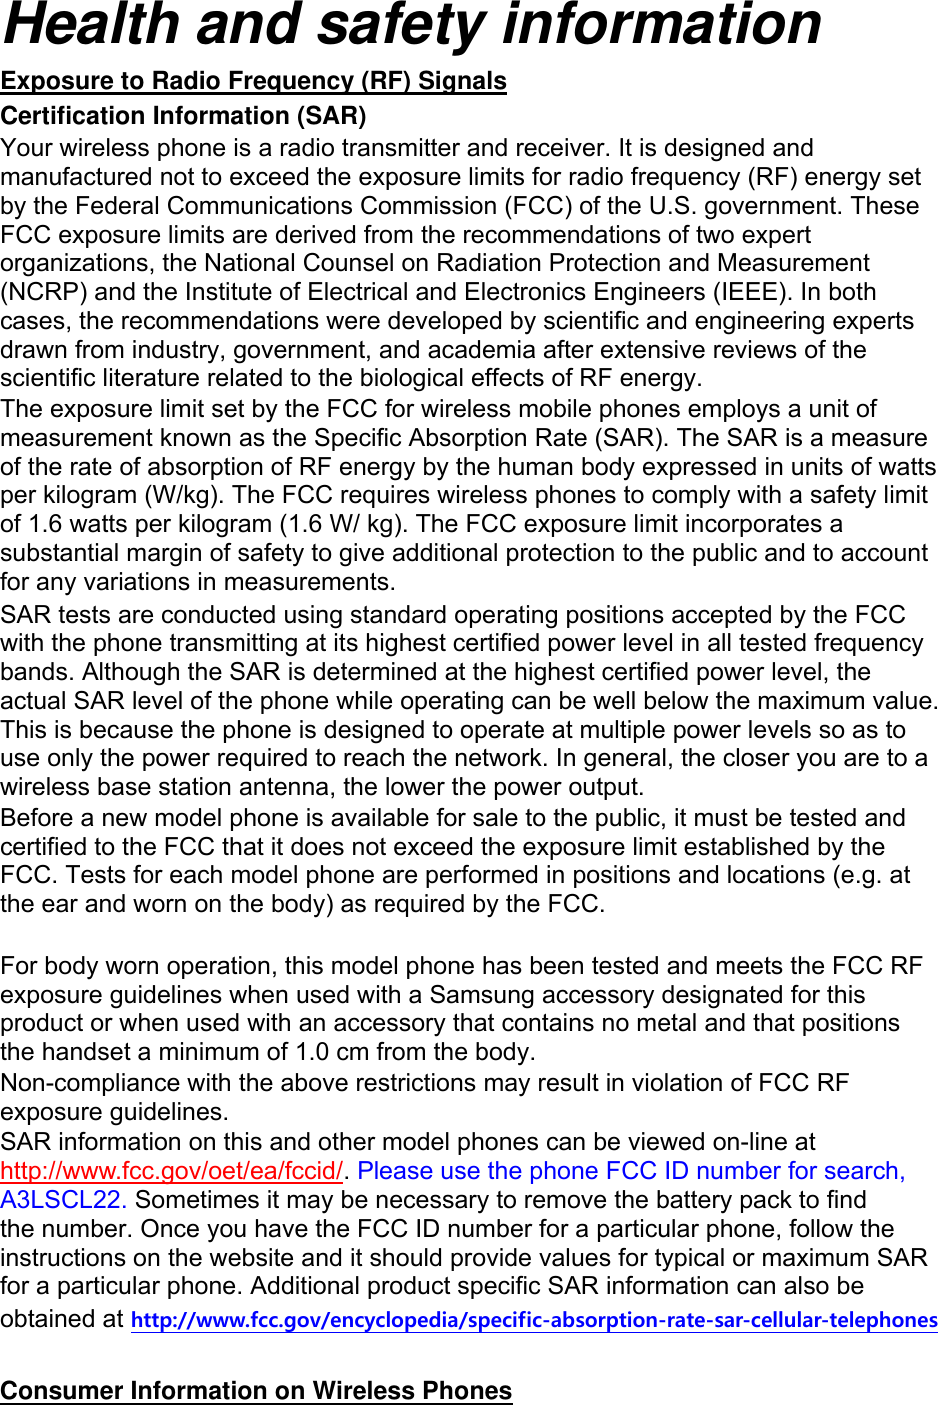 Health and safety information Exposure to Radio Frequency (RF) Signals Certification Information (SAR) Your wireless phone is a radio transmitter and receiver. It is designed and manufactured not to exceed the exposure limits for radio frequency (RF) energy set by the Federal Communications Commission (FCC) of the U.S. government. These FCC exposure limits are derived from the recommendations of two expert organizations, the National Counsel on Radiation Protection and Measurement (NCRP) and the Institute of Electrical and Electronics Engineers (IEEE). In both cases, the recommendations were developed by scientific and engineering experts drawn from industry, government, and academia after extensive reviews of the scientific literature related to the biological effects of RF energy. The exposure limit set by the FCC for wireless mobile phones employs a unit of measurement known as the Specific Absorption Rate (SAR). The SAR is a measure of the rate of absorption of RF energy by the human body expressed in units of watts per kilogram (W/kg). The FCC requires wireless phones to comply with a safety limit of 1.6 watts per kilogram (1.6 W/ kg). The FCC exposure limit incorporates a substantial margin of safety to give additional protection to the public and to account for any variations in measurements. SAR tests are conducted using standard operating positions accepted by the FCC with the phone transmitting at its highest certified power level in all tested frequency bands. Although the SAR is determined at the highest certified power level, the actual SAR level of the phone while operating can be well below the maximum value. This is because the phone is designed to operate at multiple power levels so as to use only the power required to reach the network. In general, the closer you are to a wireless base station antenna, the lower the power output. Before a new model phone is available for sale to the public, it must be tested and certified to the FCC that it does not exceed the exposure limit established by the FCC. Tests for each model phone are performed in positions and locations (e.g. at the ear and worn on the body) as required by the FCC.      For body worn operation, this model phone has been tested and meets the FCC RF exposure guidelines when used with a Samsung accessory designated for this product or when used with an accessory that contains no metal and that positions the handset a minimum of 1.0 cm from the body.   Non-compliance with the above restrictions may result in violation of FCC RF exposure guidelines. SAR information on this and other model phones can be viewed on-line at http://www.fcc.gov/oet/ea/fccid/. Please use the phone FCC ID number for search, A3LSCL22. Sometimes it may be necessary to remove the battery pack to find the number. Once you have the FCC ID number for a particular phone, follow the instructions on the website and it should provide values for typical or maximum SAR for a particular phone. Additional product specific SAR information can also be obtained at http://www.fcc.gov/encyclopedia/specific-absorption-rate-sar-cellular-telephones  Consumer Information on Wireless Phones 